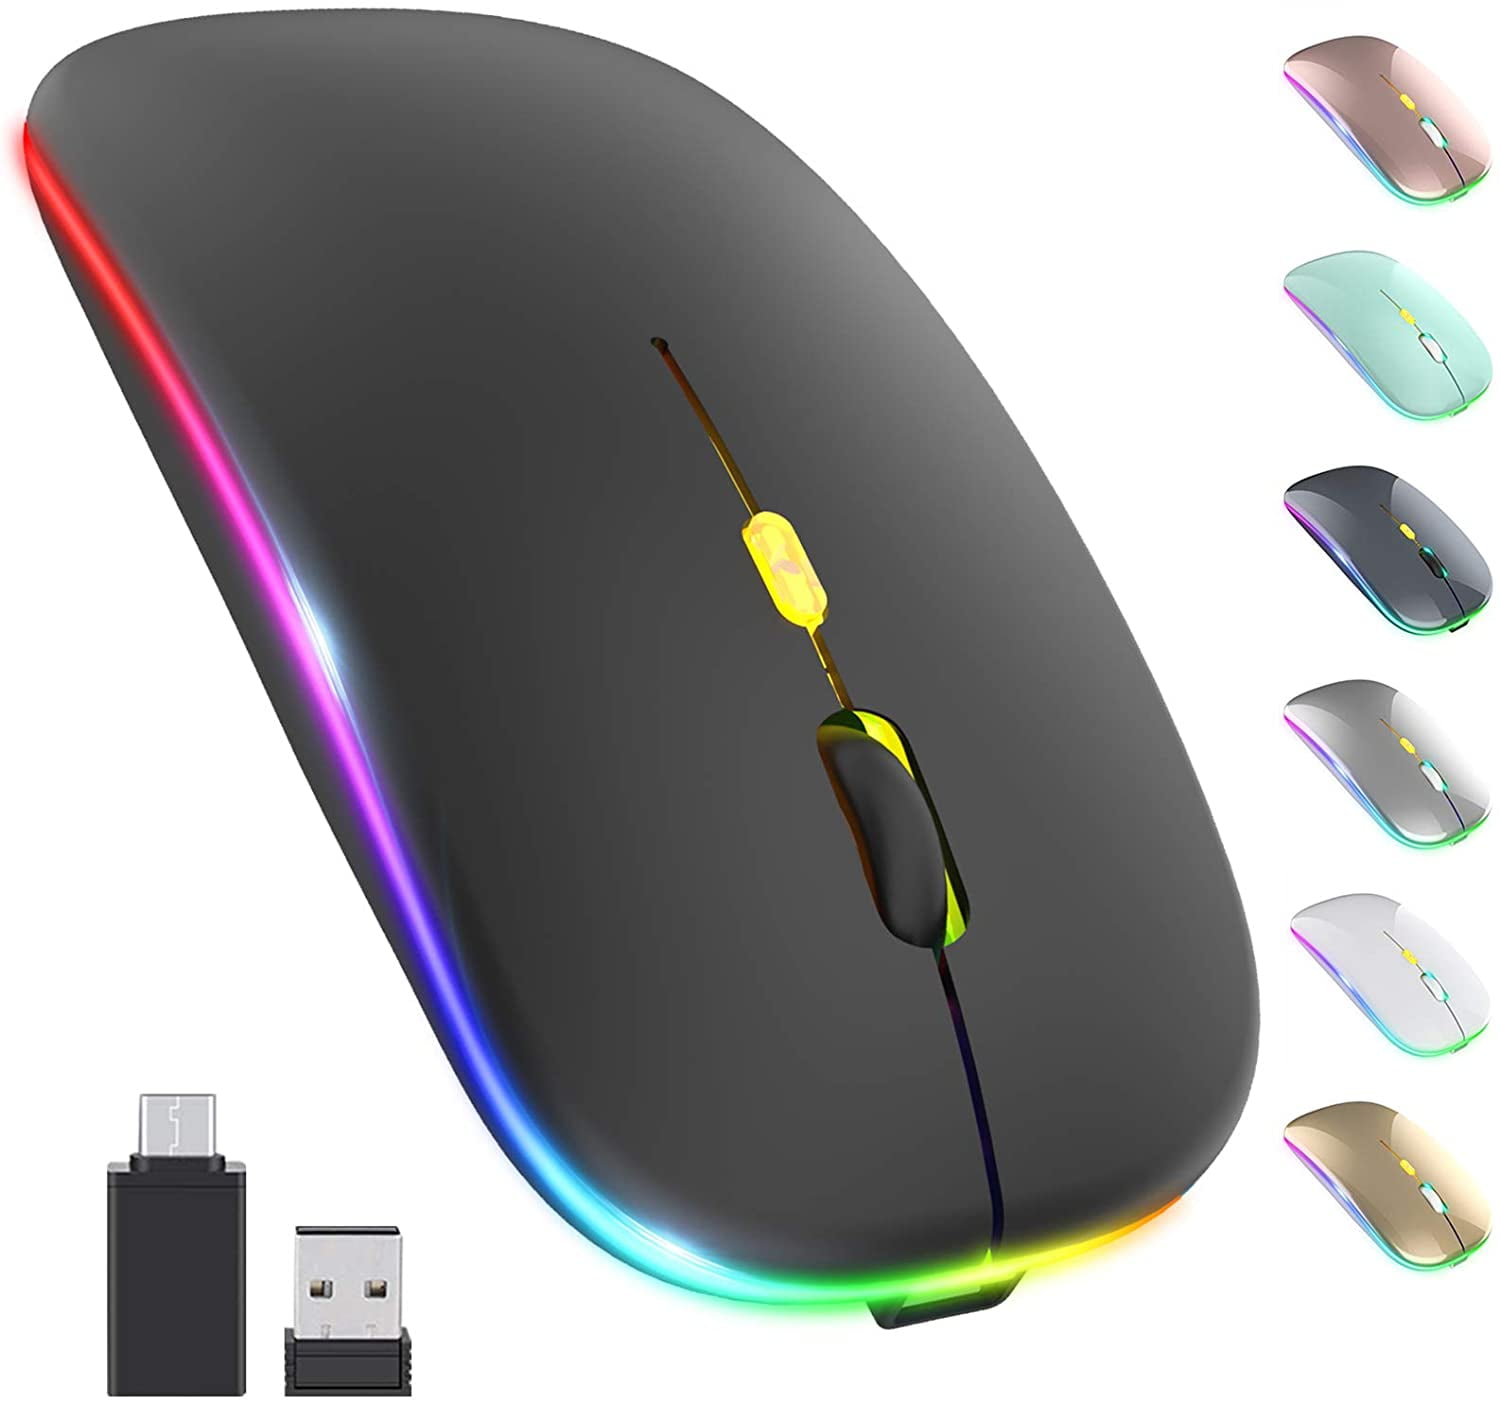 STPlus San Diego California United States of America Postcard City View 2.4 GHz Wireless Mouse with Ergonomic Design and Nano Receiver